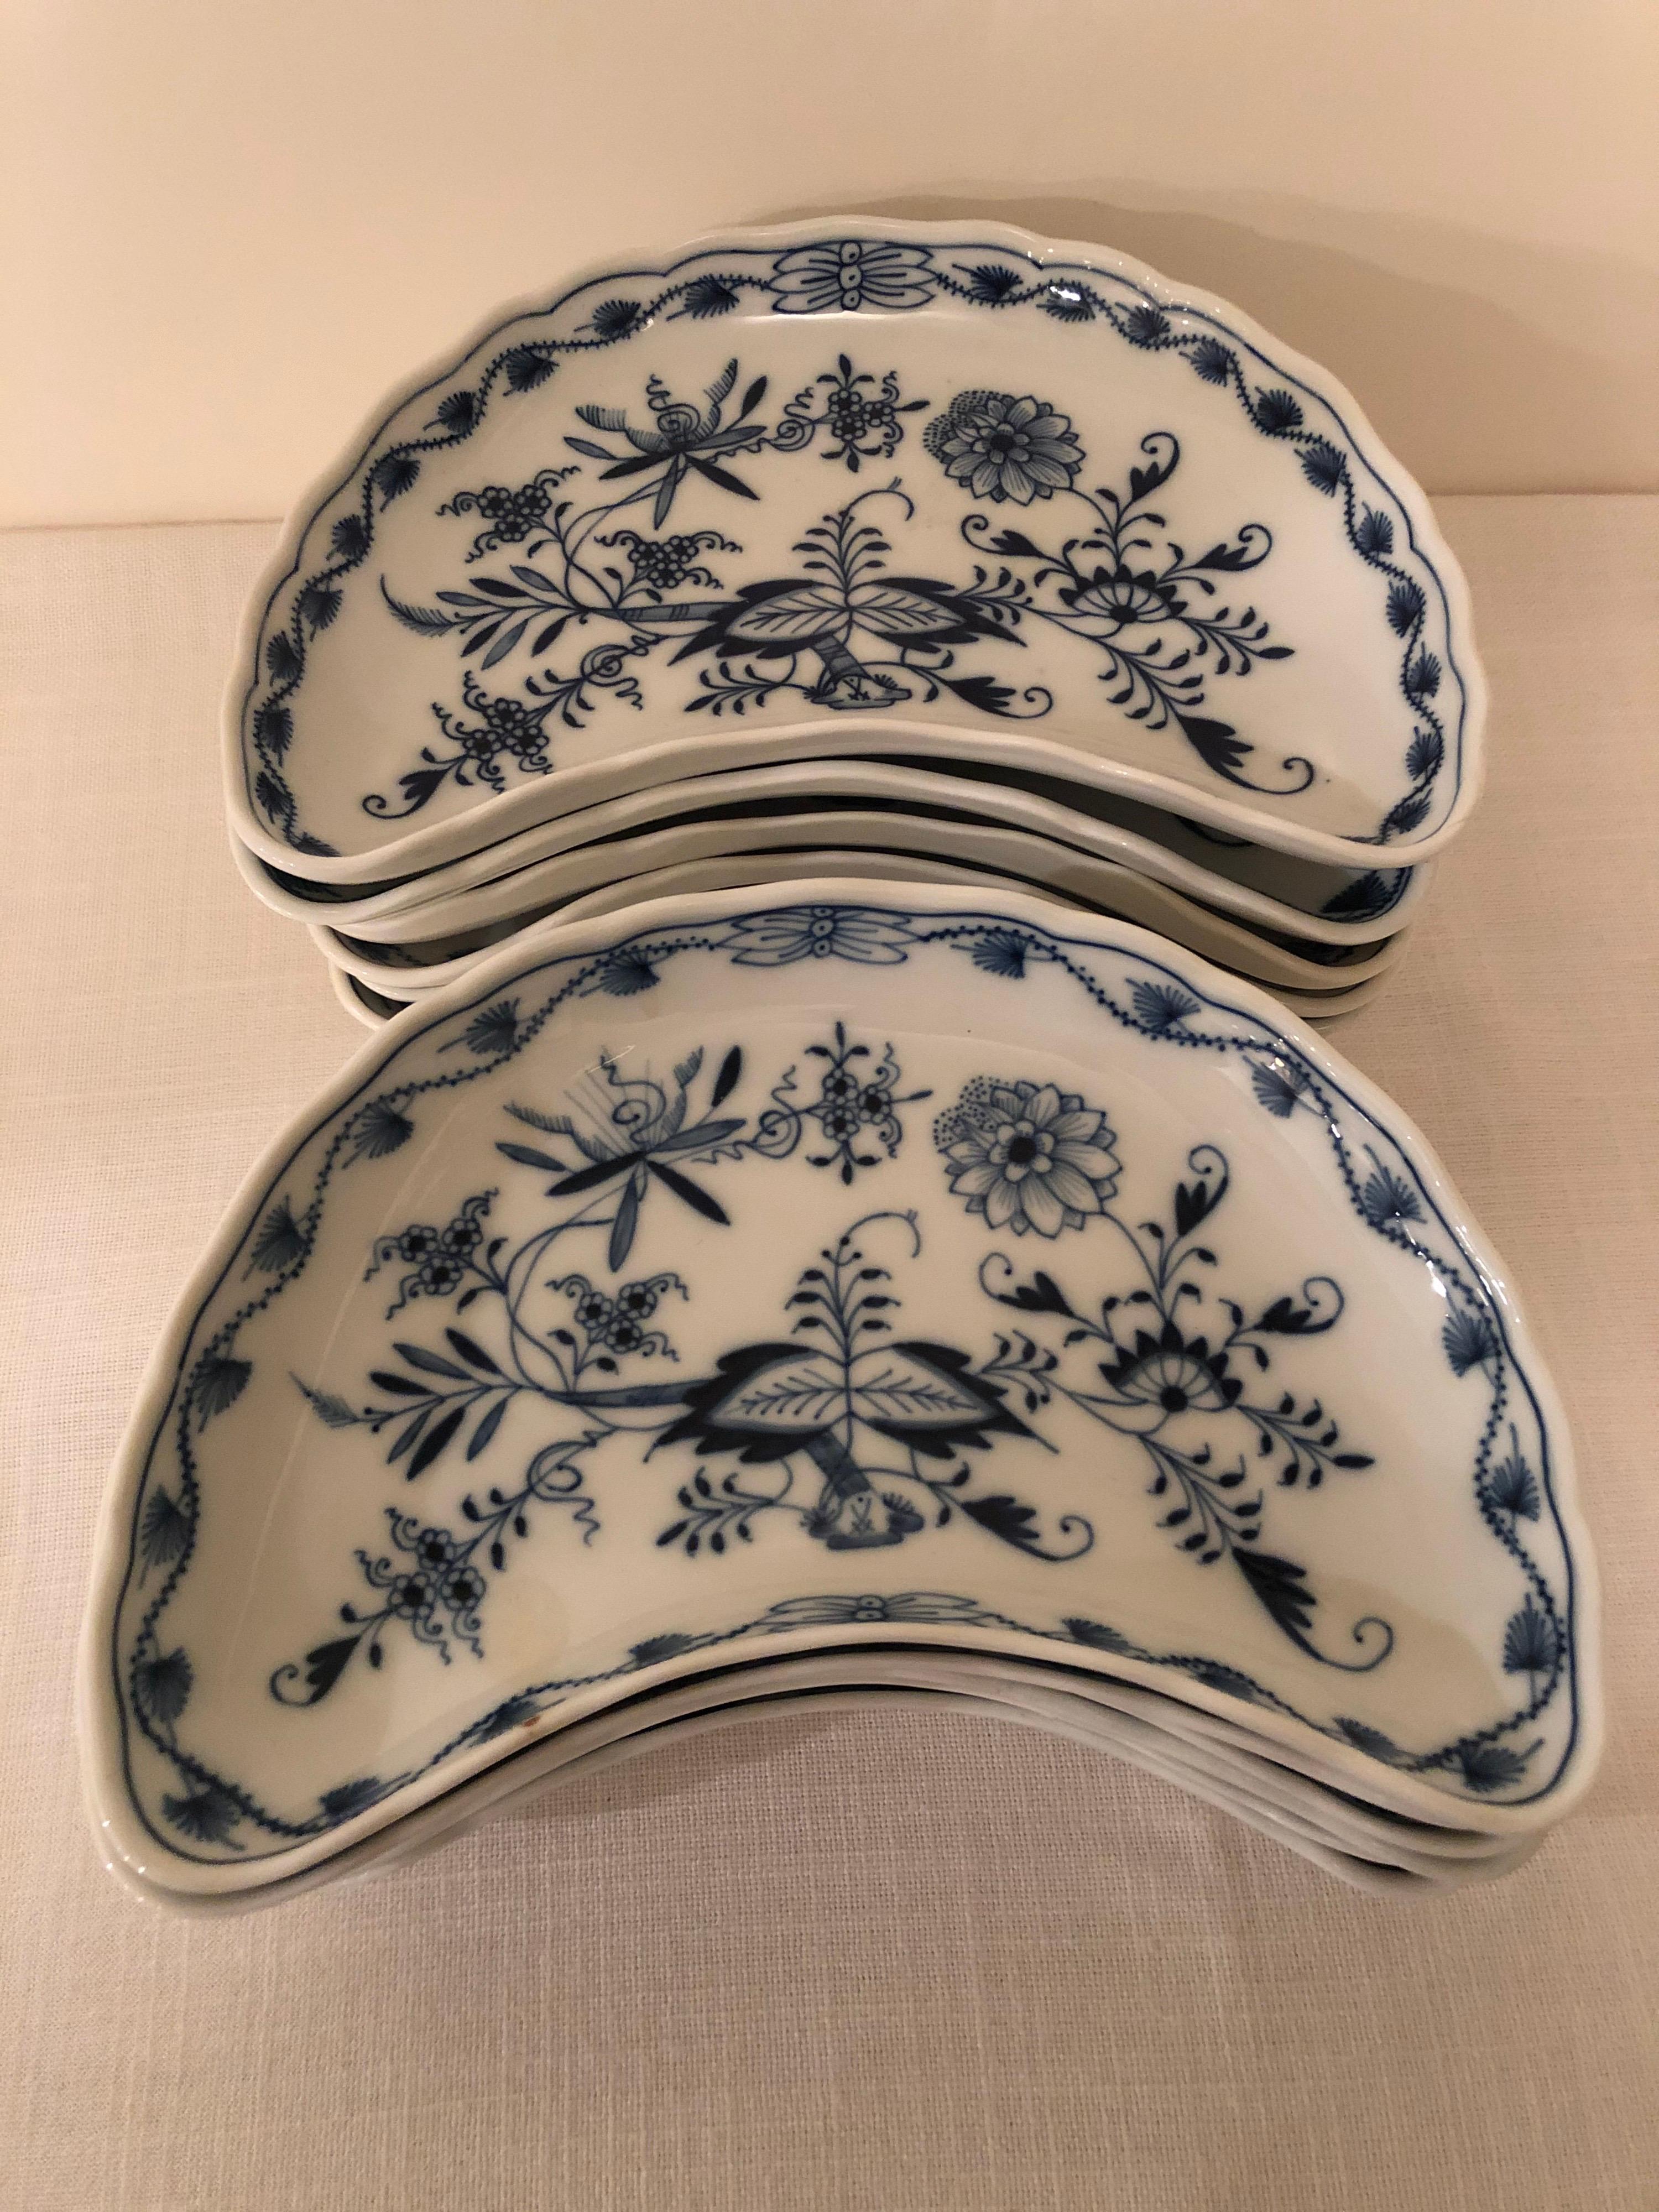 what are crescent shaped plates used for